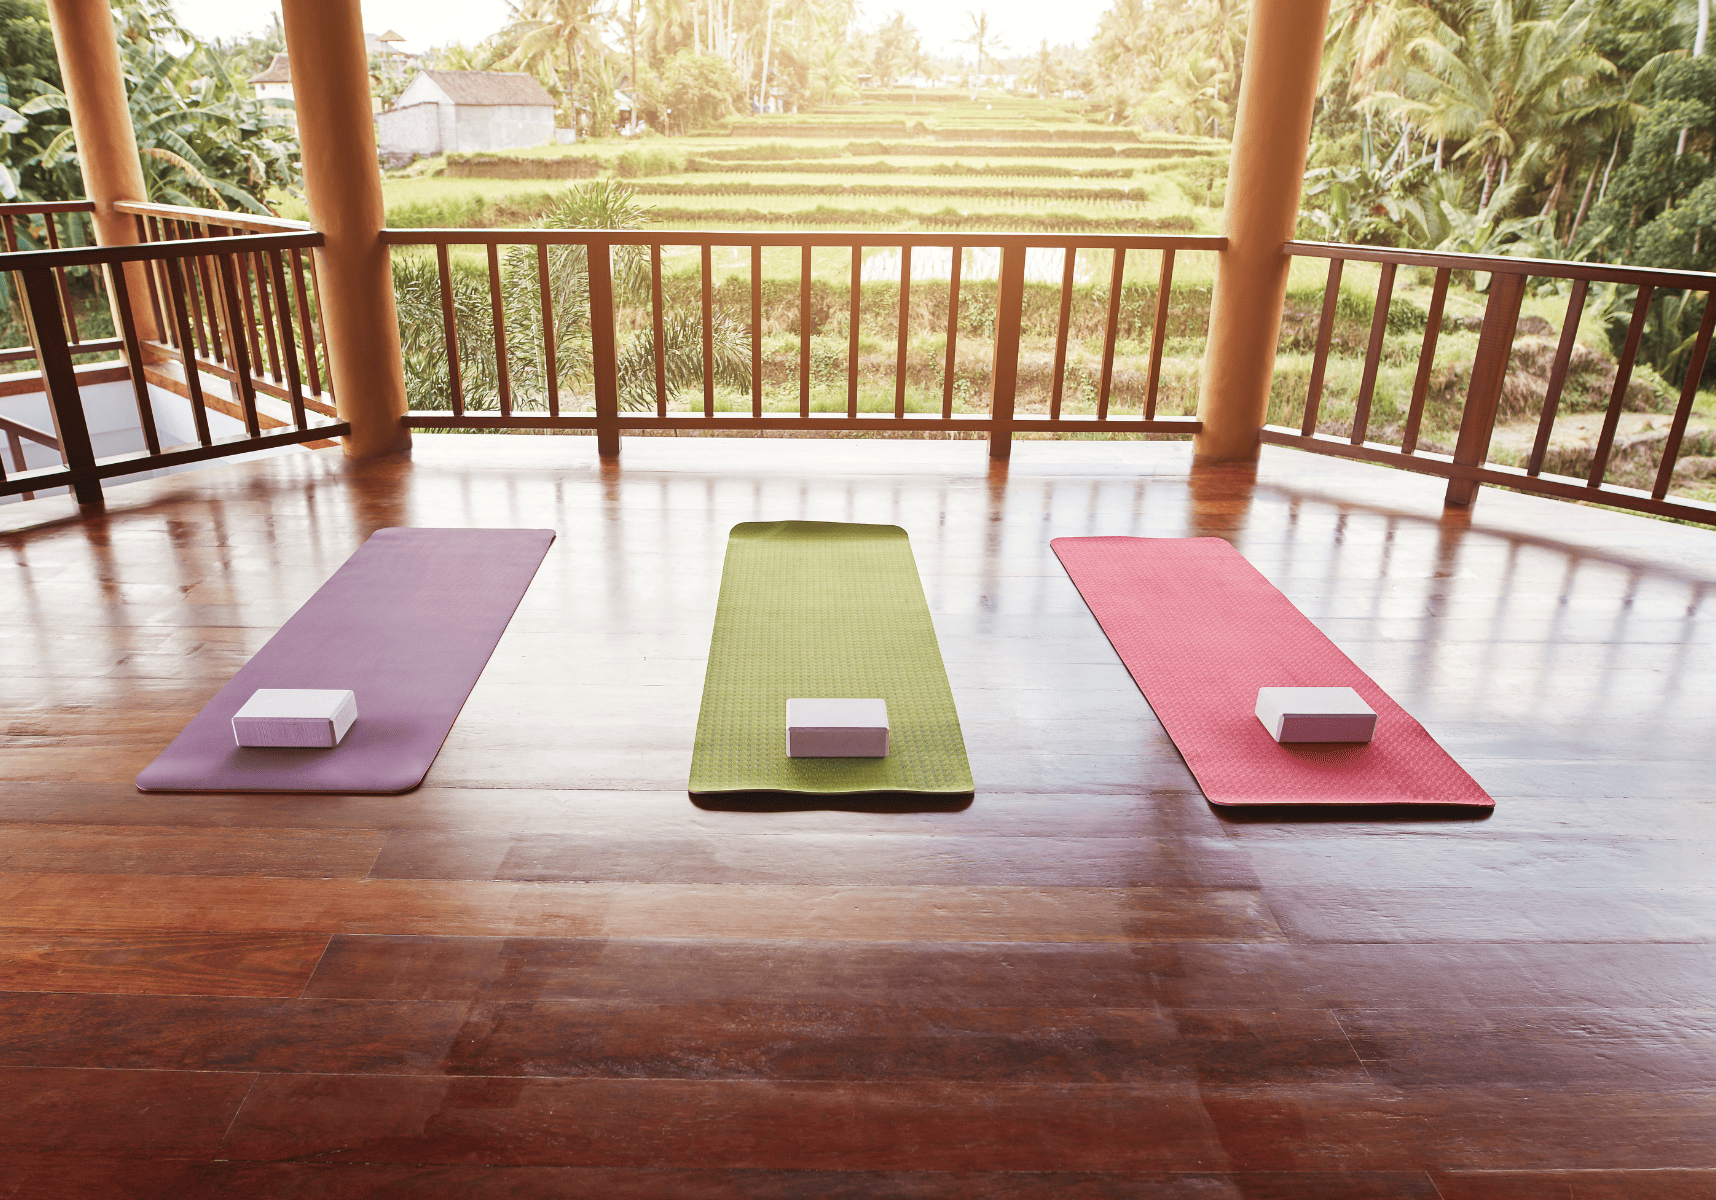 7 Landscaping Ideas To Create an Outdoor Yoga Studio